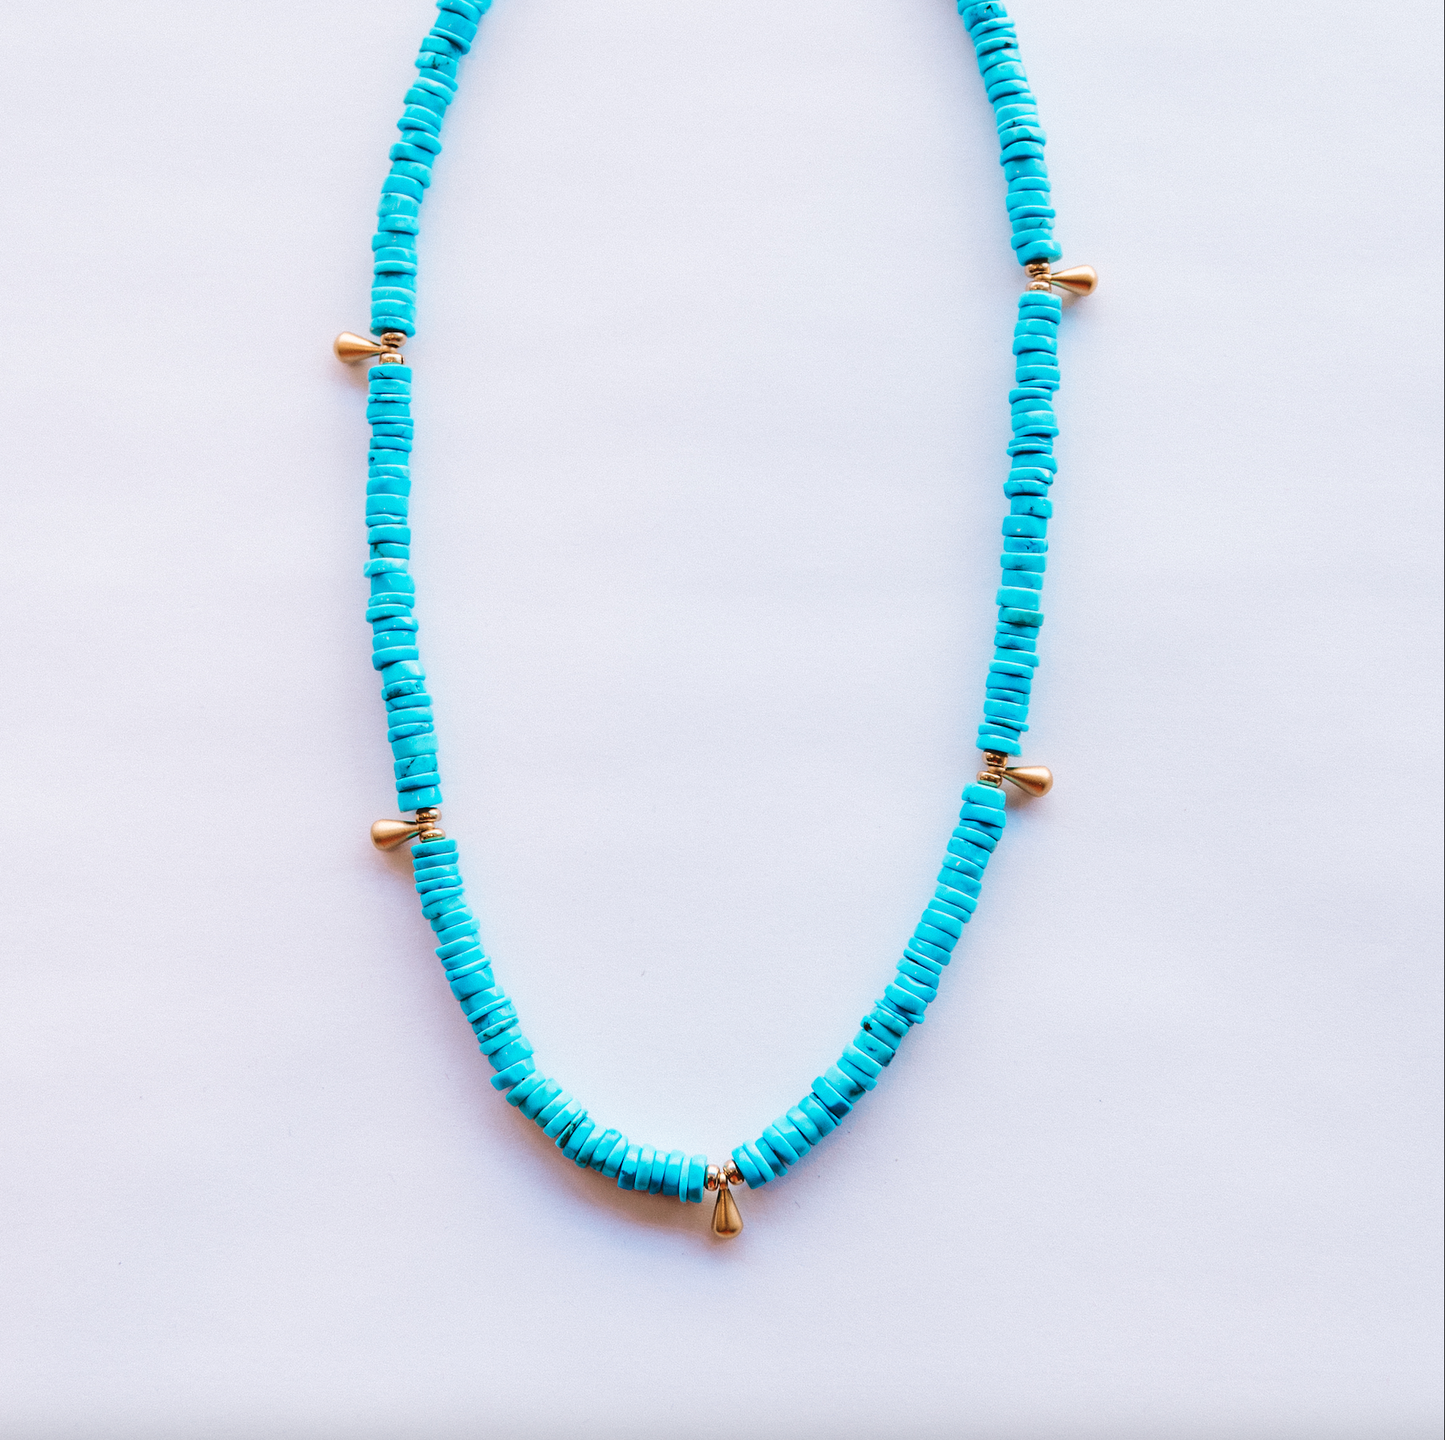 The Turquoise Beaded Necklace